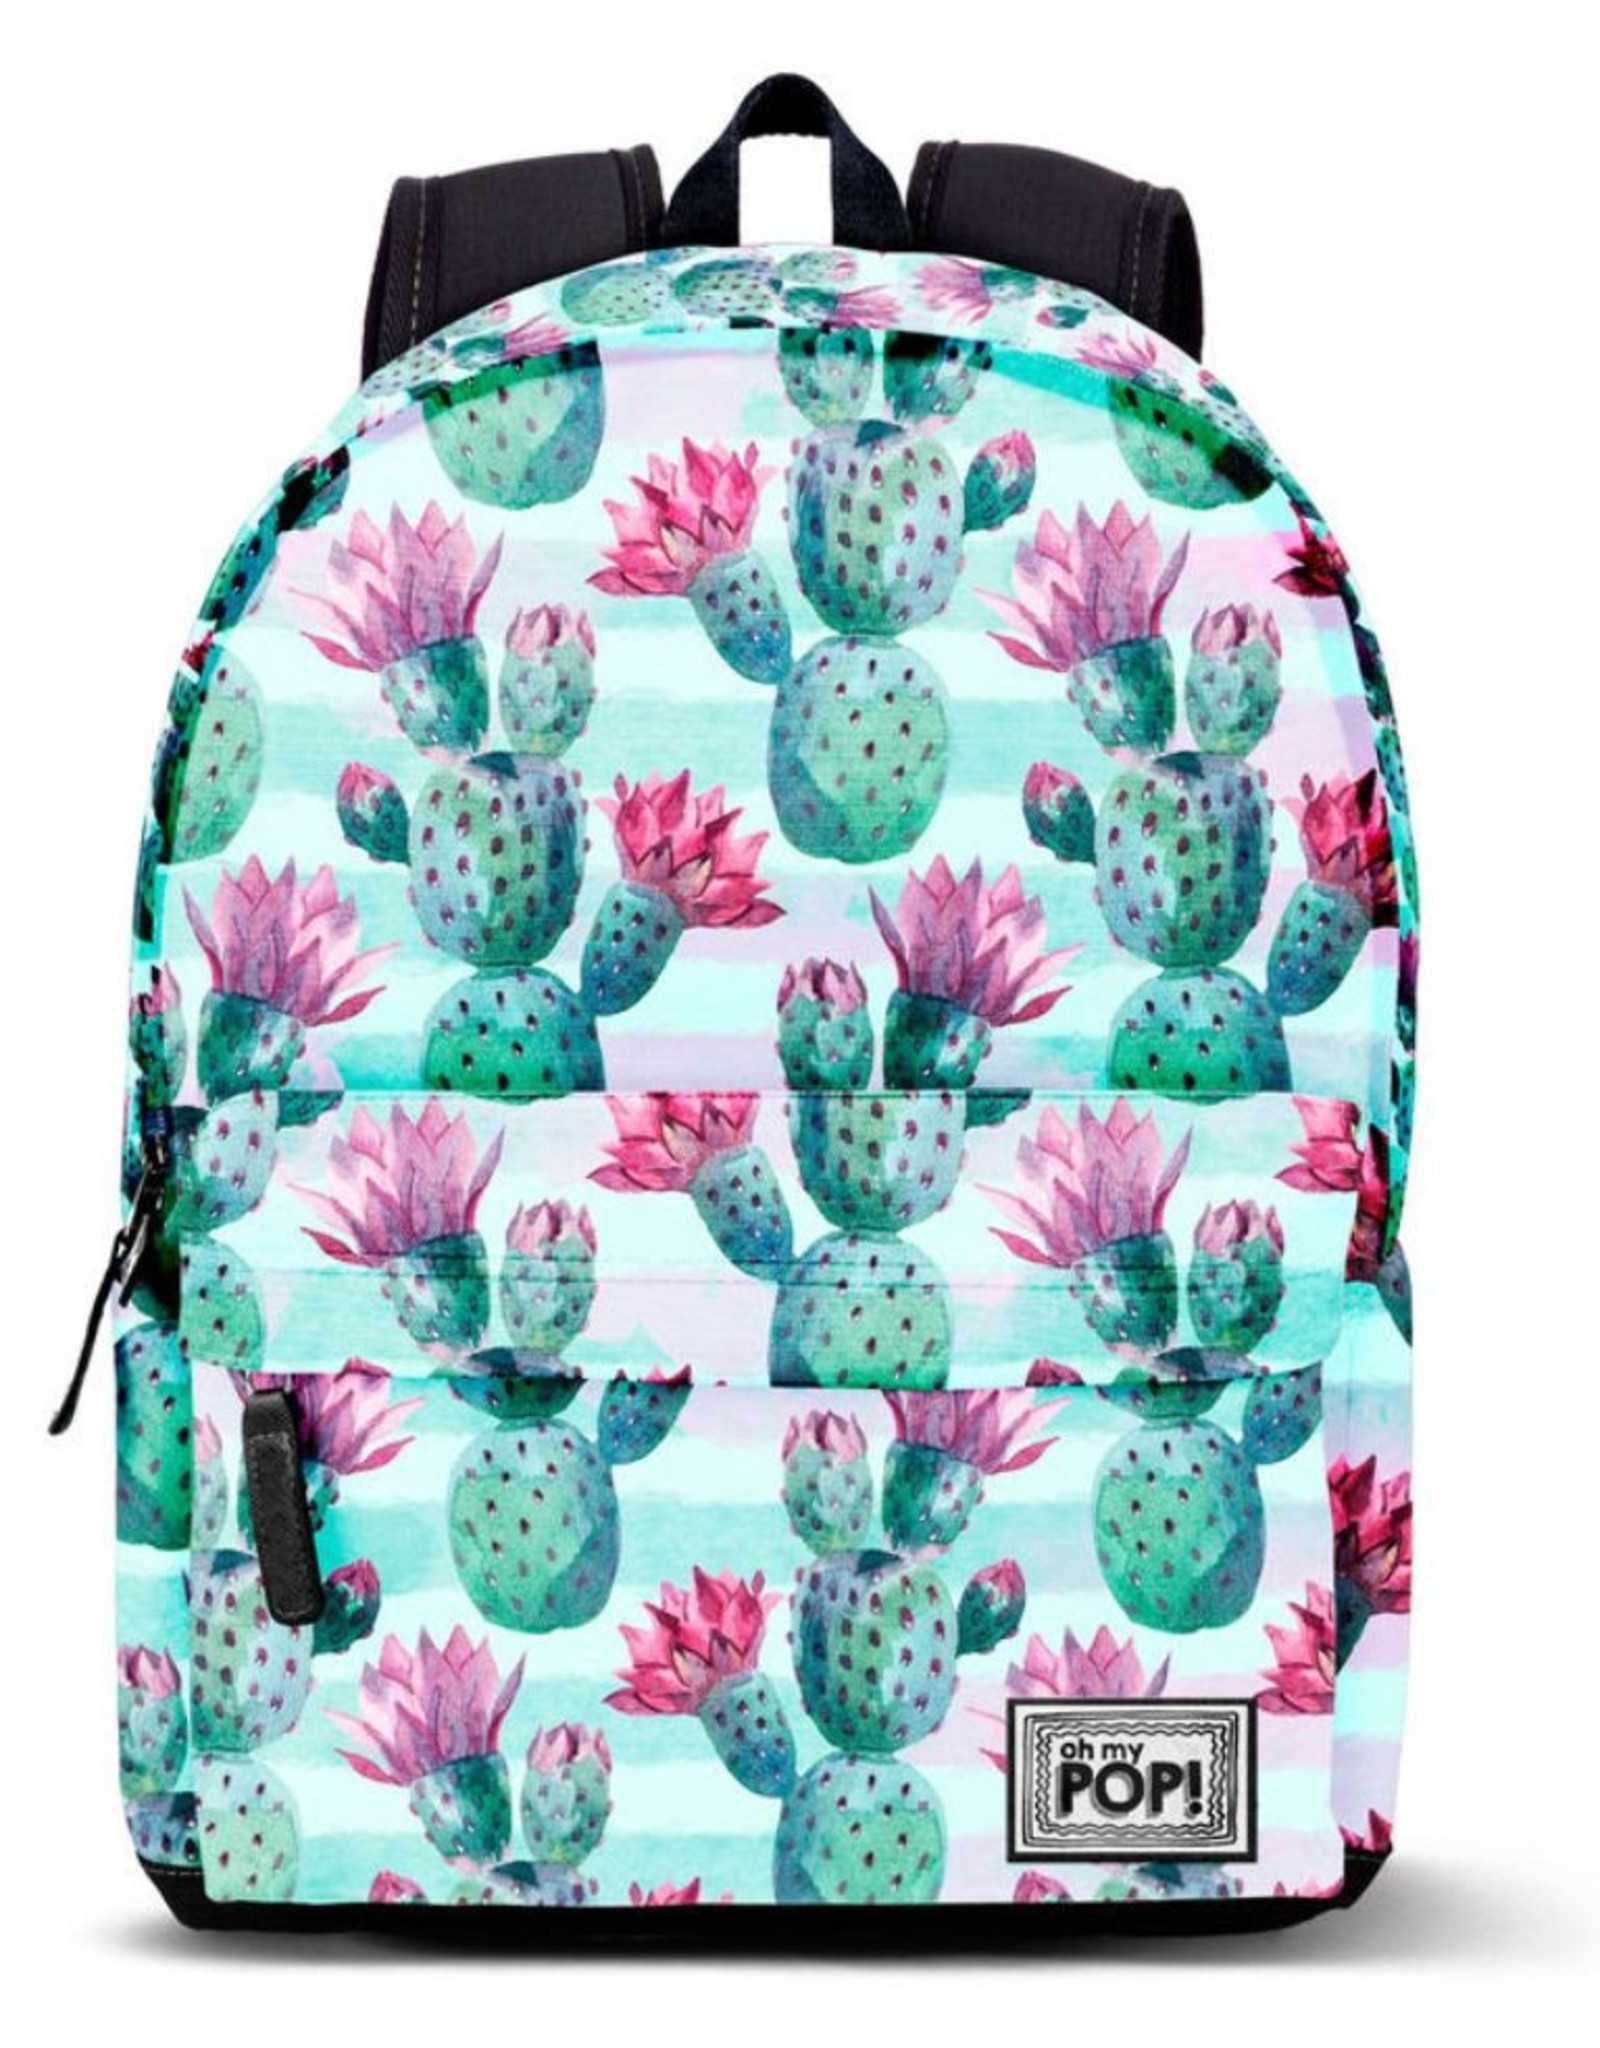 Oh my Pop! Fantasy bags - Oh My Pop! Cactus backpack